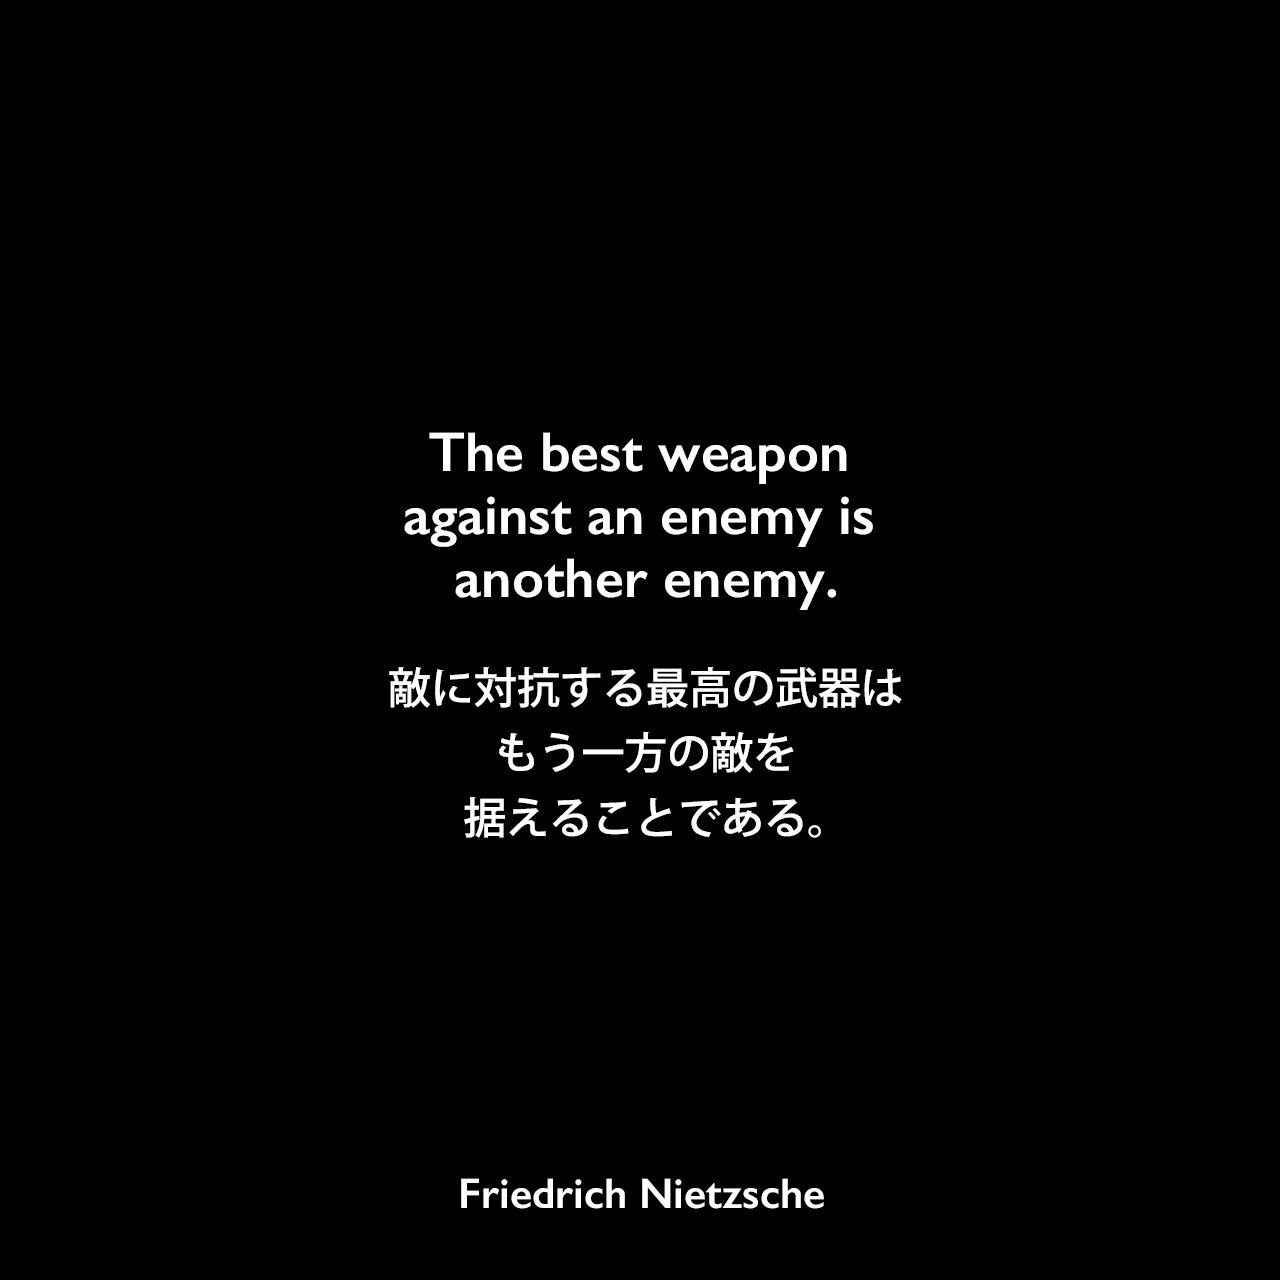 The best weapon against an enemy is another enemy.敵に対抗する最高の武器はもう一方の敵を据えることである。Friedrich Nietzsche